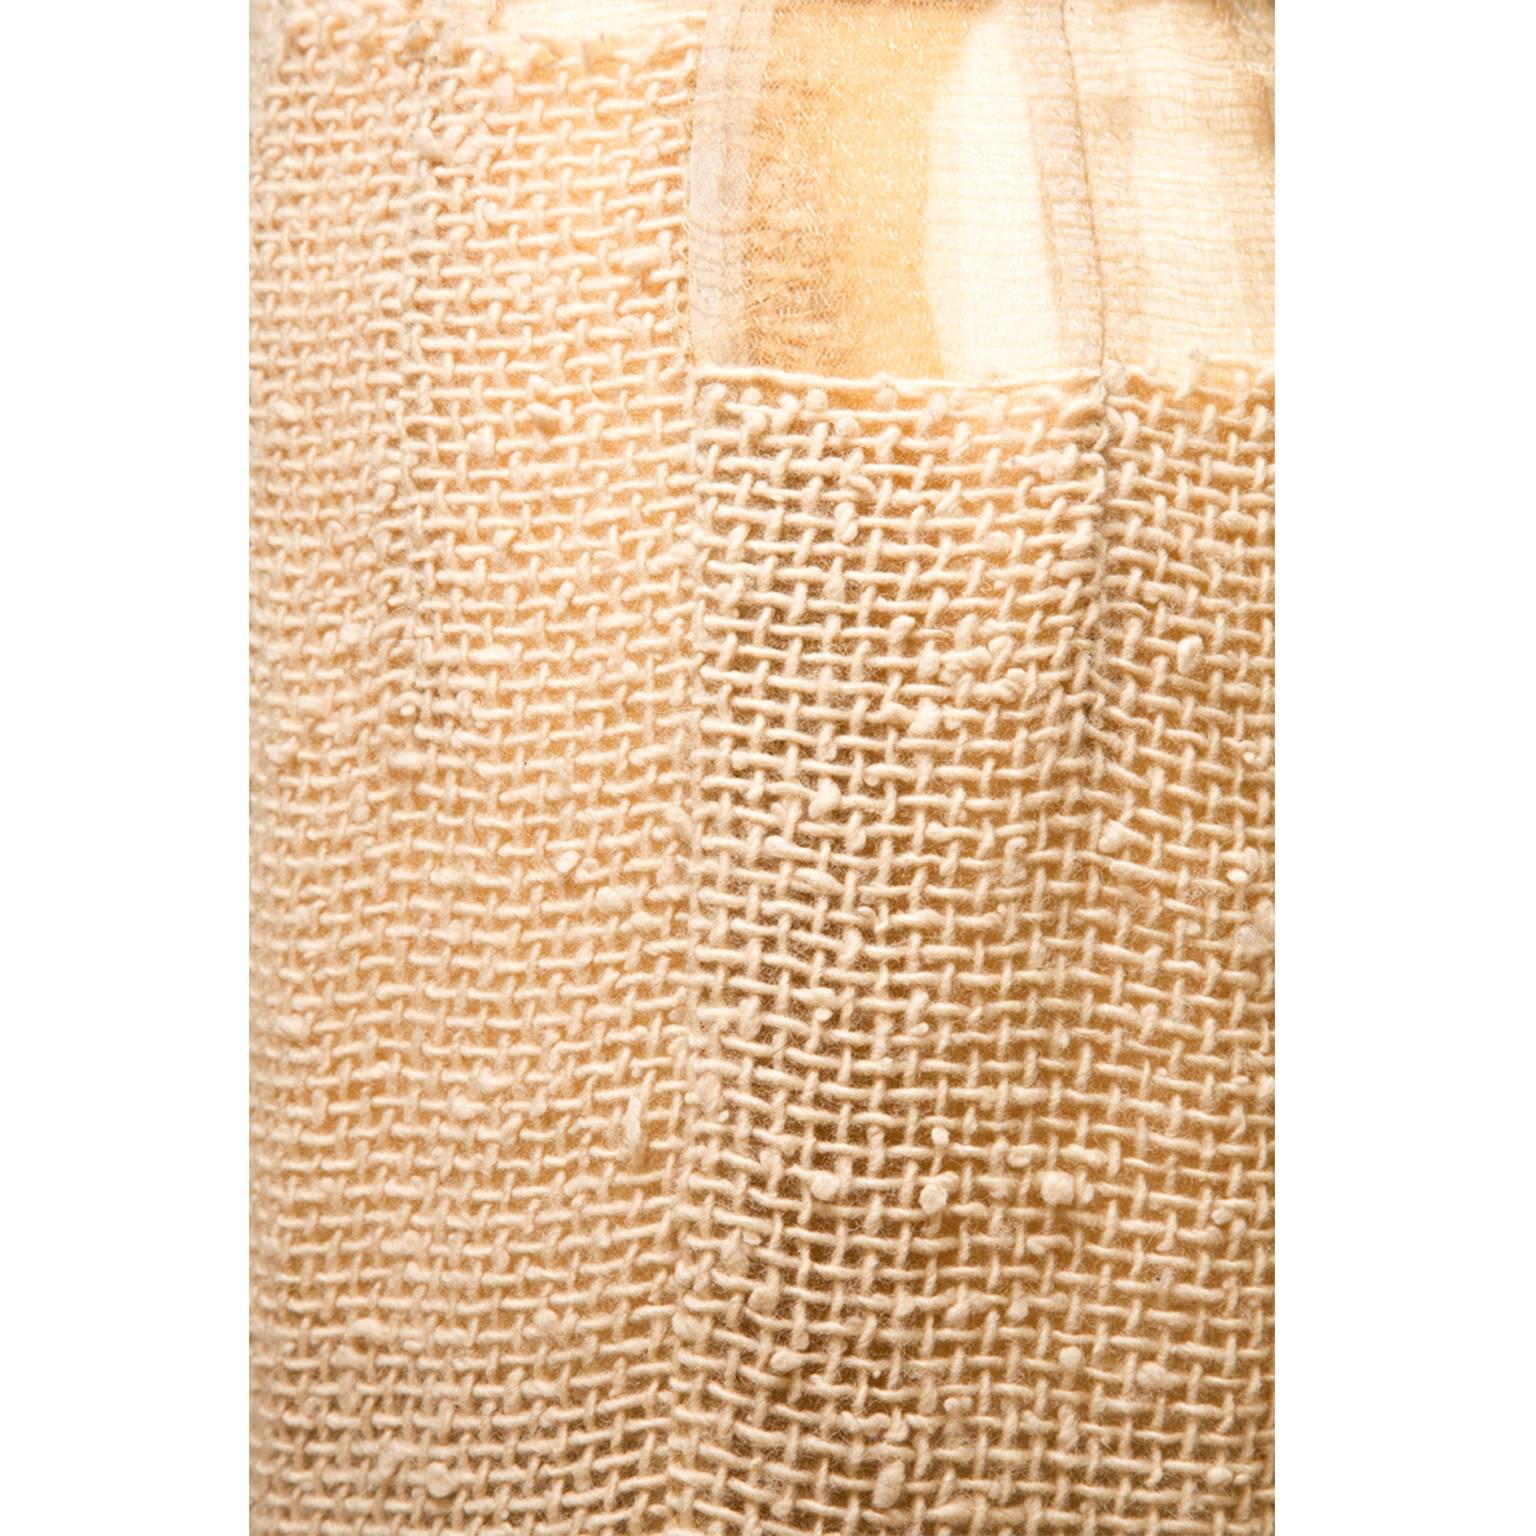 Comme des Garcons Woven Gold Beige Patchwork Skirt AD1997 In Excellent Condition For Sale In Berlin, DE